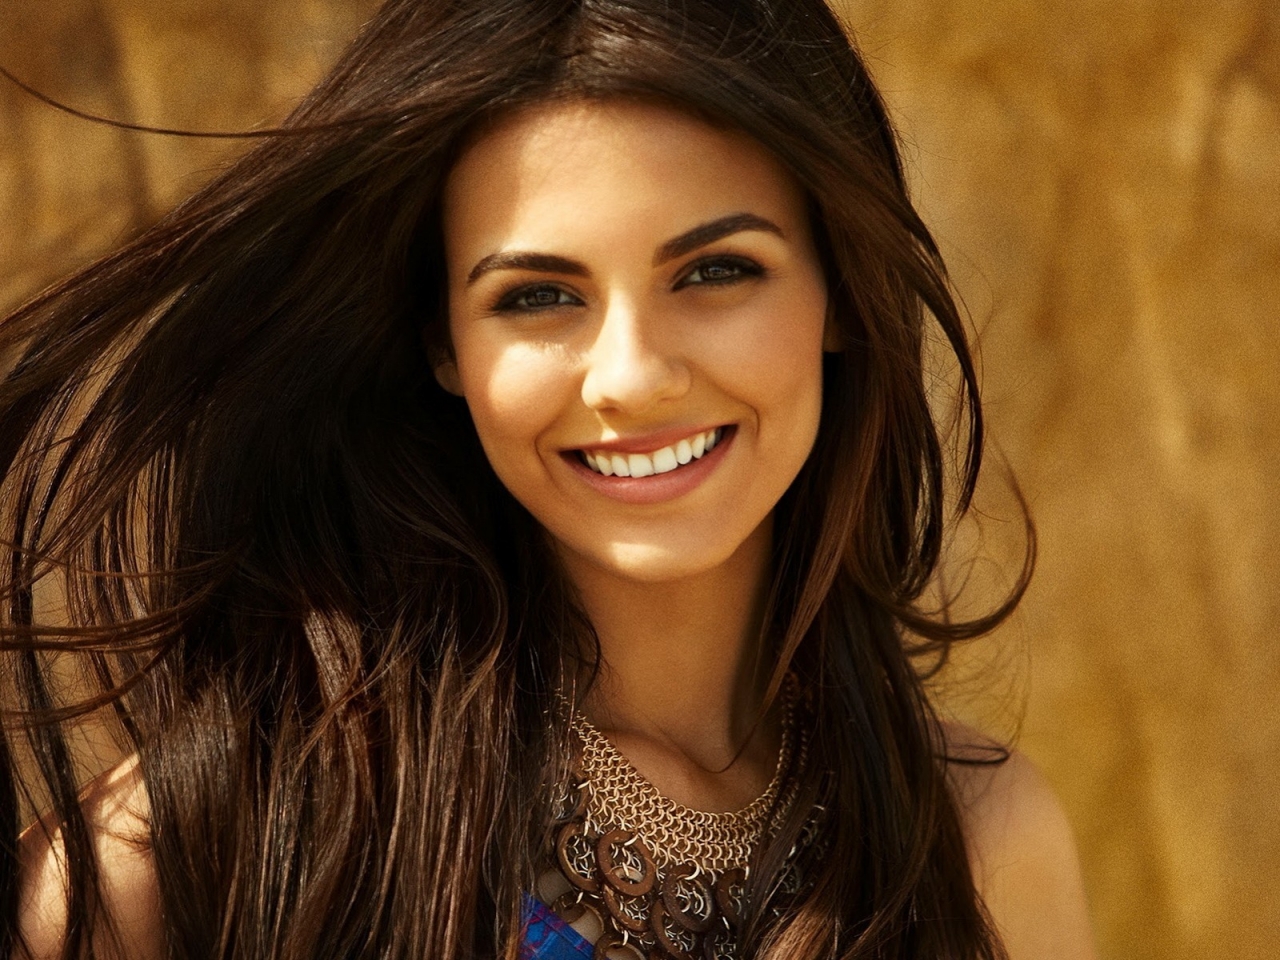 Cute Smile of Victoria Justice for 1280 x 960 resolution